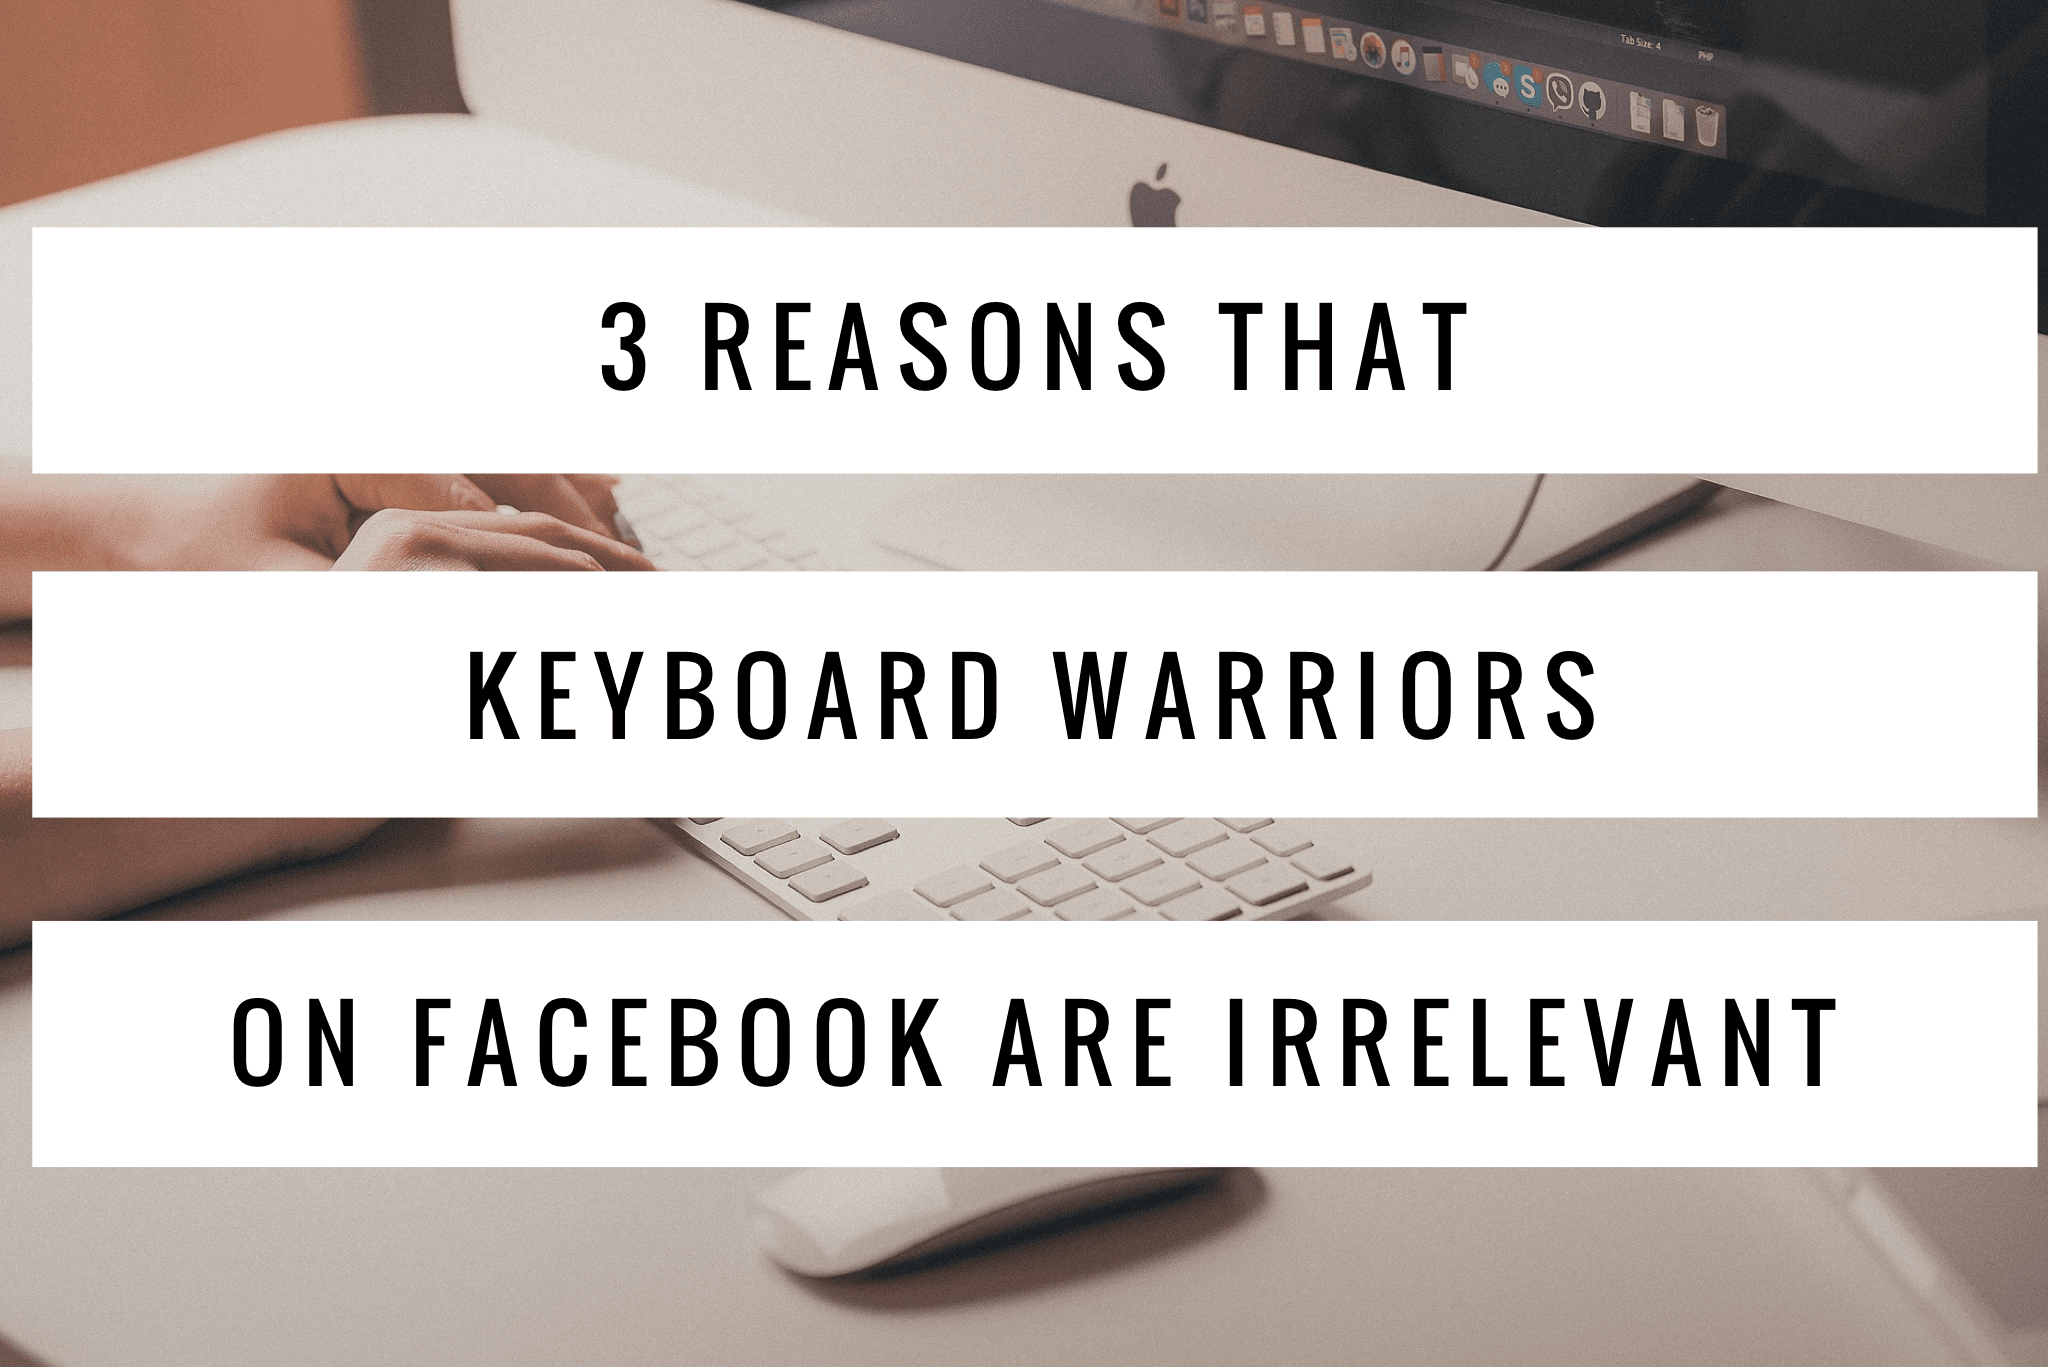 3 Reasons That Keyboard Warriors On Facebook Are Irrelevant